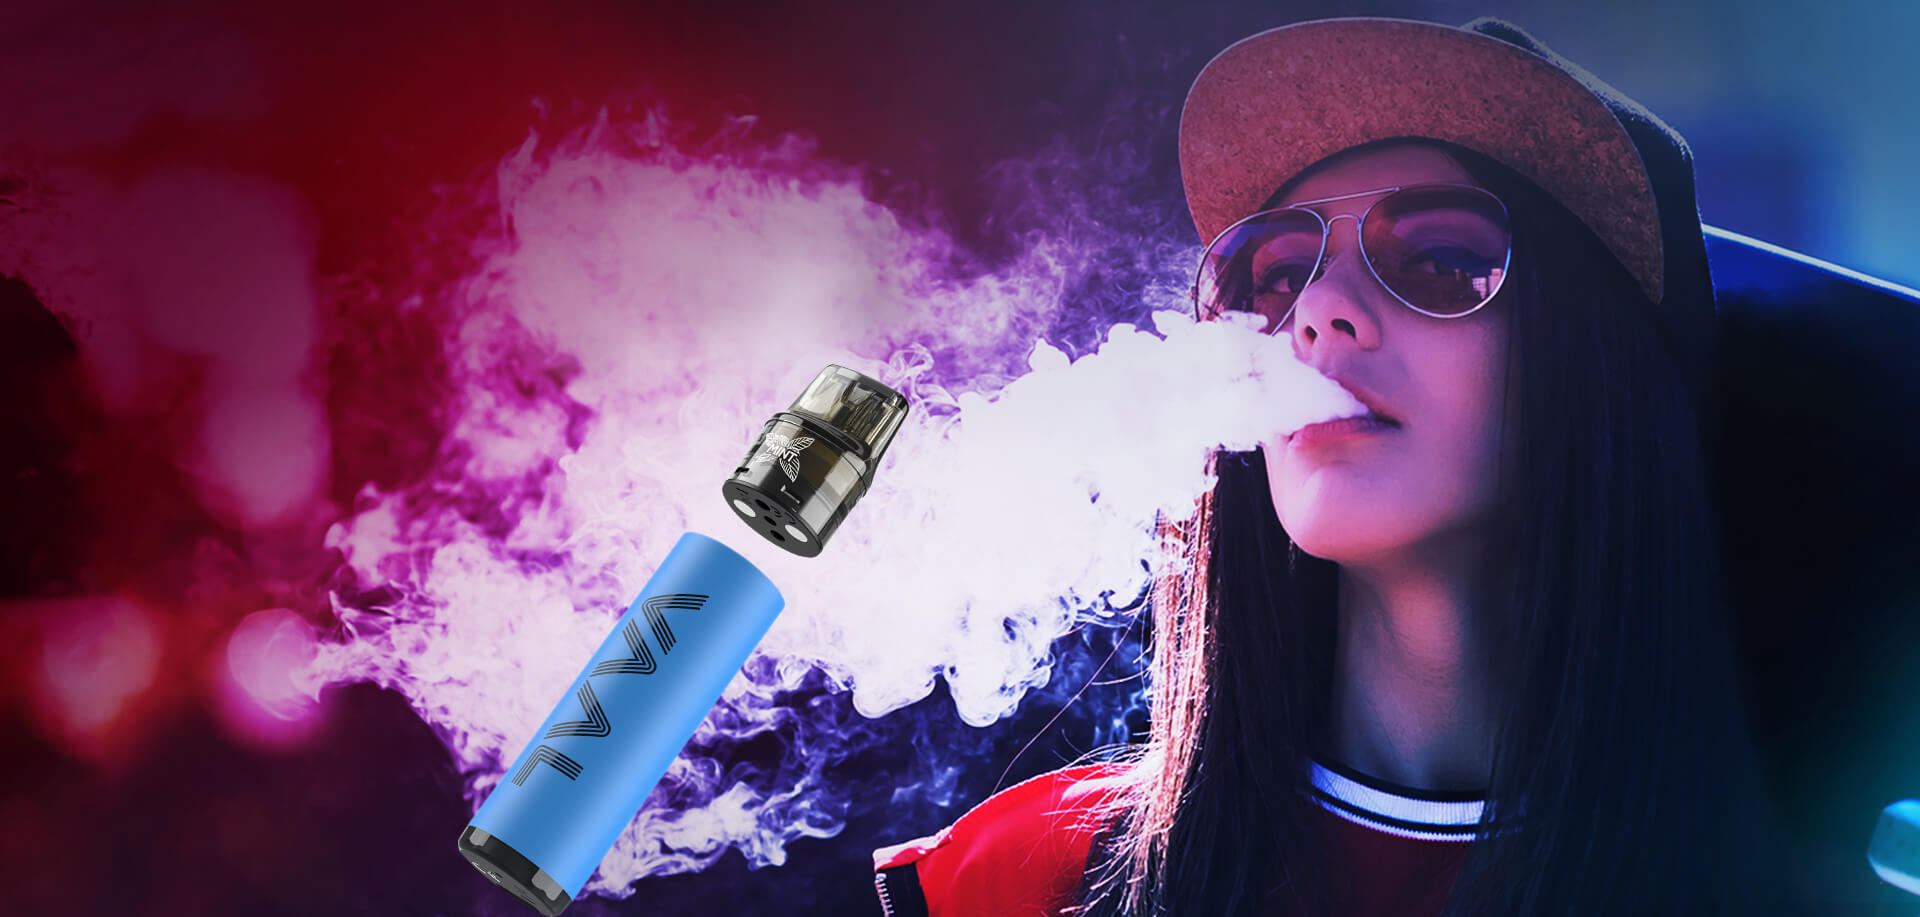 With a 2ml capacity e-liquid, Vaal 500C can offer up to 500 puffs pure and enjoyable taste. Its feature of changeable pod let users can choose their favorite flavors.